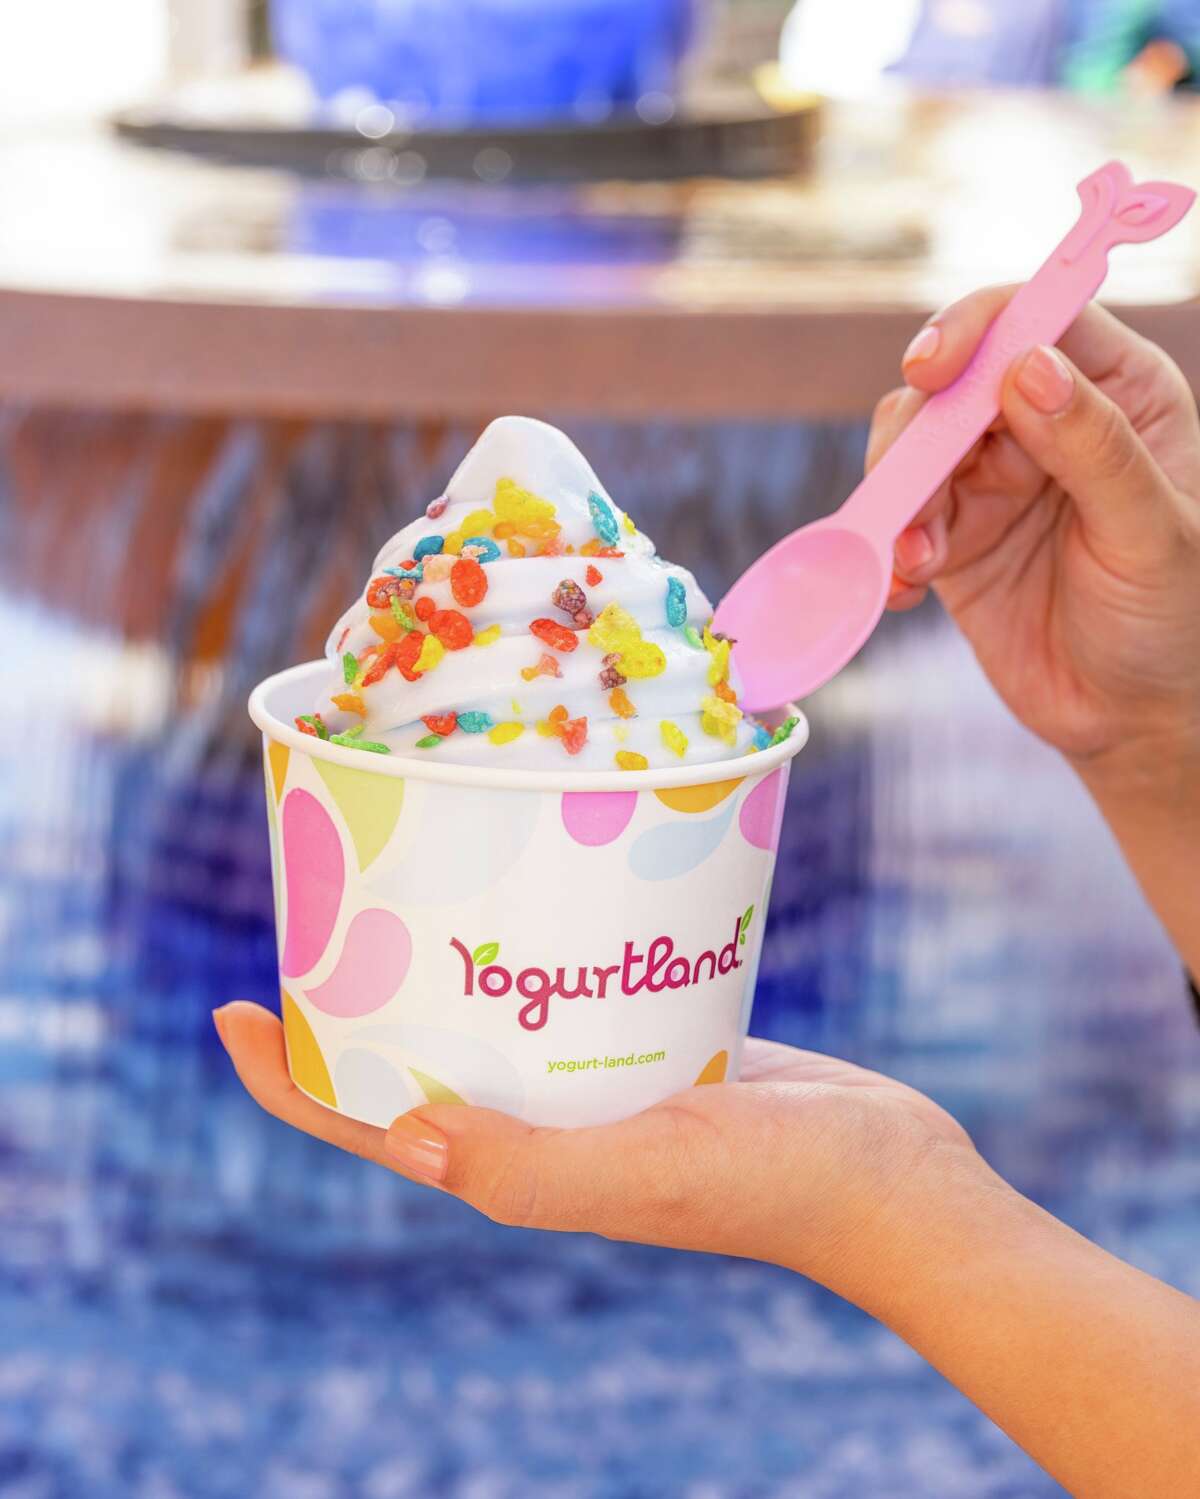 Yogurtland in Memorial City Mall in Houston offers 12 rotating scratch-made flavors of frozen yogurt in a self-serve format. There are also more than 40 toppings to choose from.